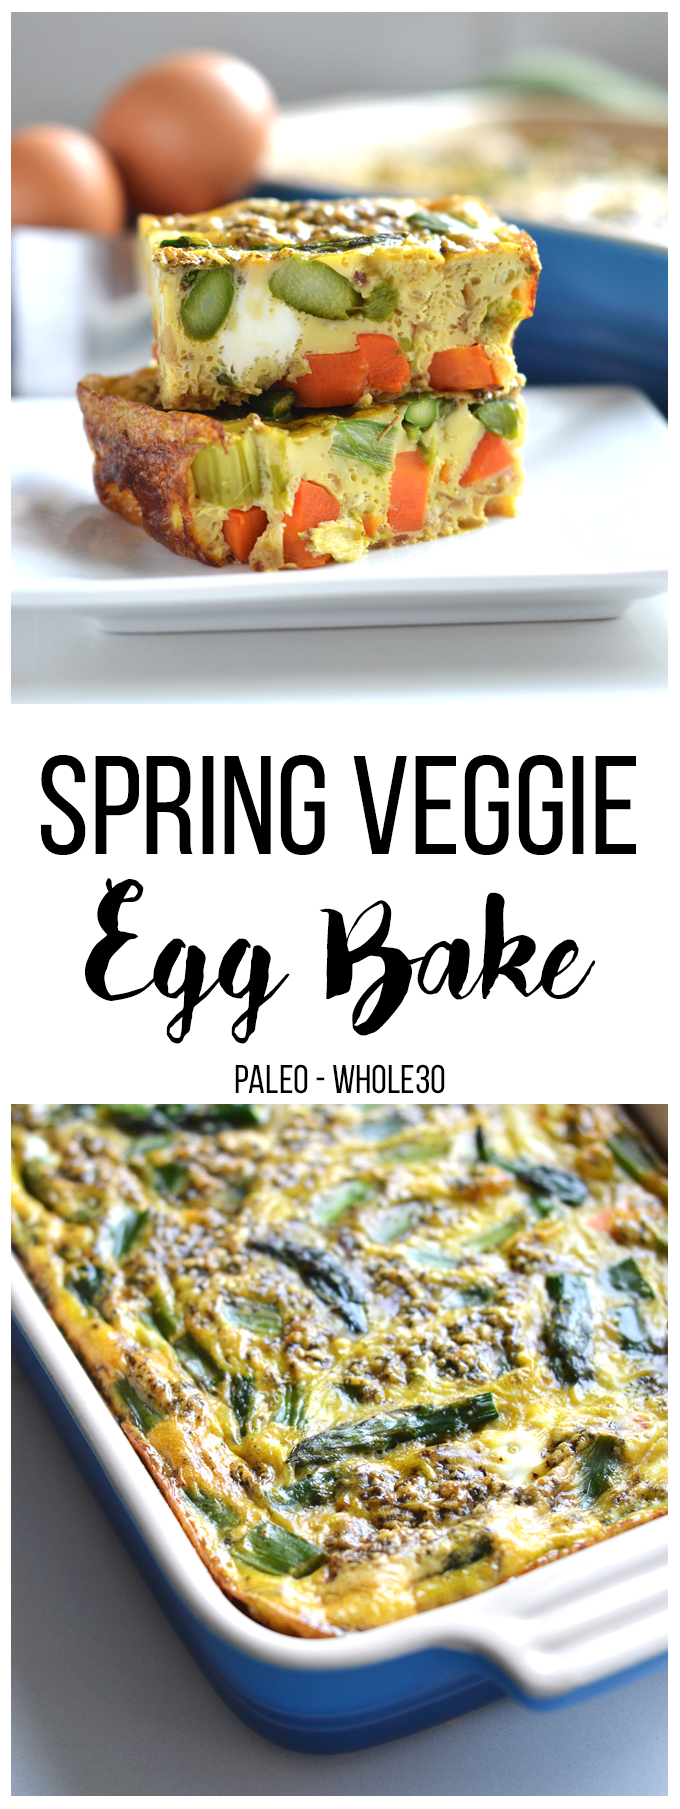 This Spring Veggie Egg Bake is a great way to get your vegetables in at breakfast! Also a great Whole30 & Paleo option for Easter Brunch!